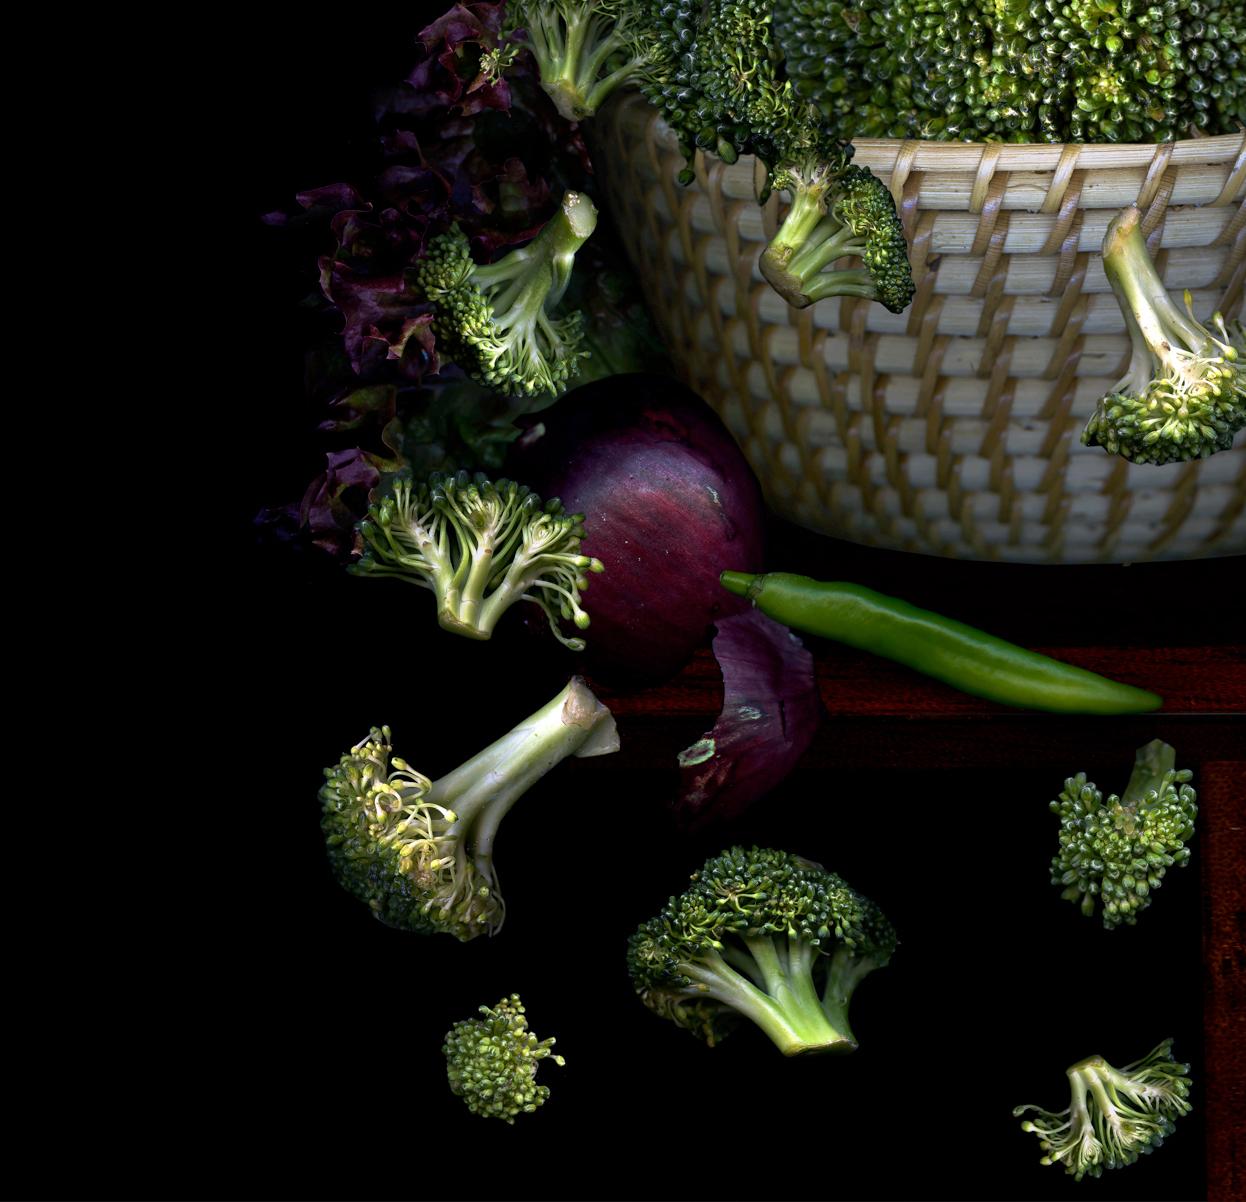 Vegetables from my garden #6 by Zoltan Gerliczki
From the Vegetables from my garden series
Archival Pigment Print 
Image size: 39 in H x 48 in W.
Edition of 9 + 2AP
Unframed
2021

